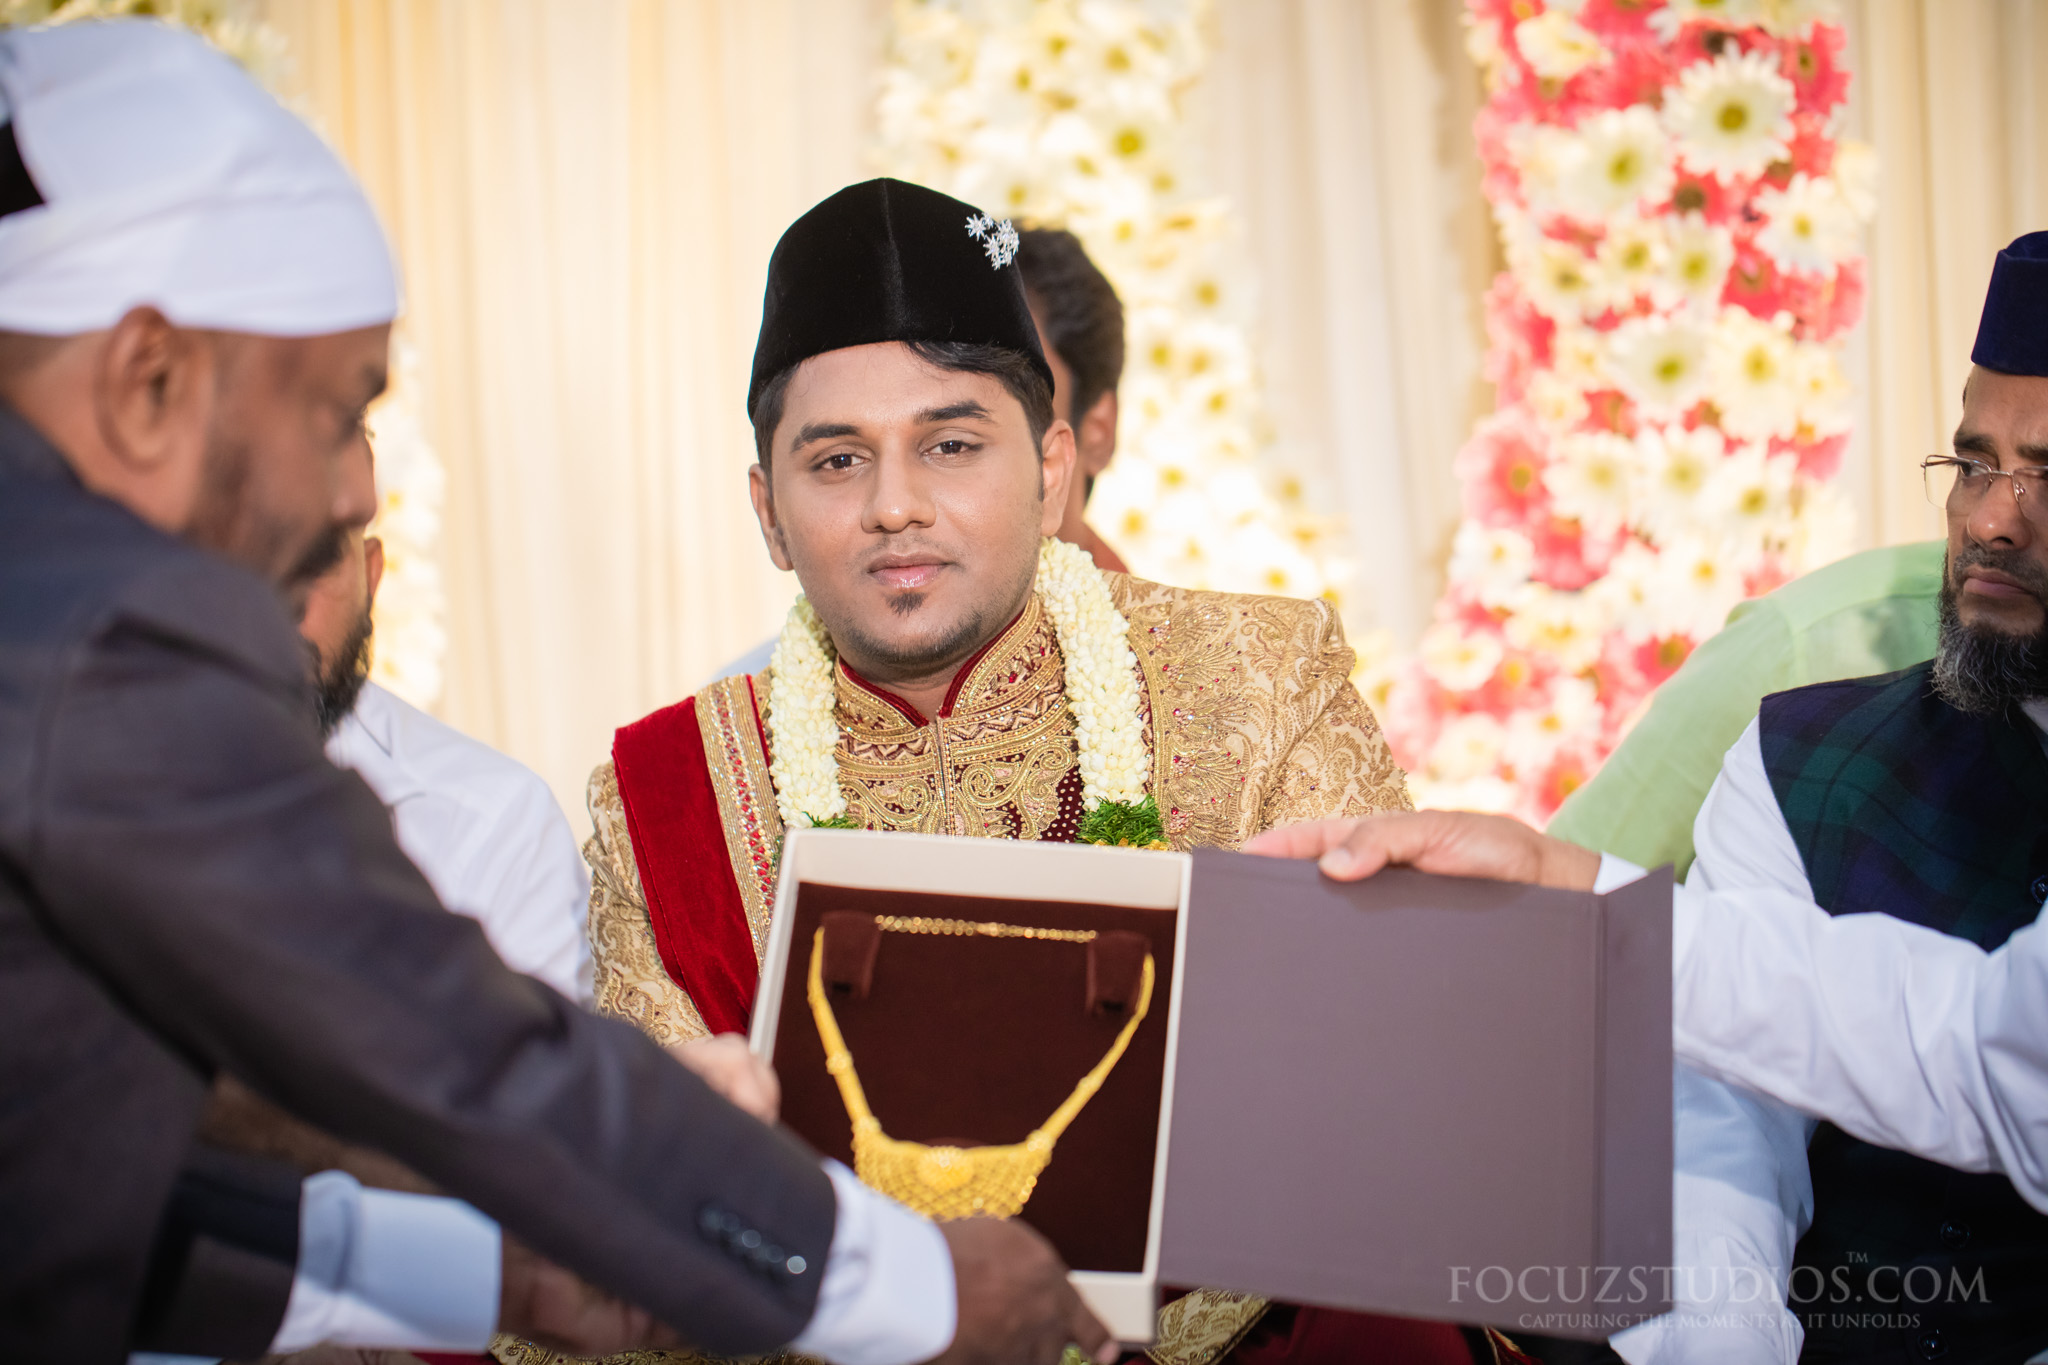 Islamic wedding giving outfits and gifts to the bride 3